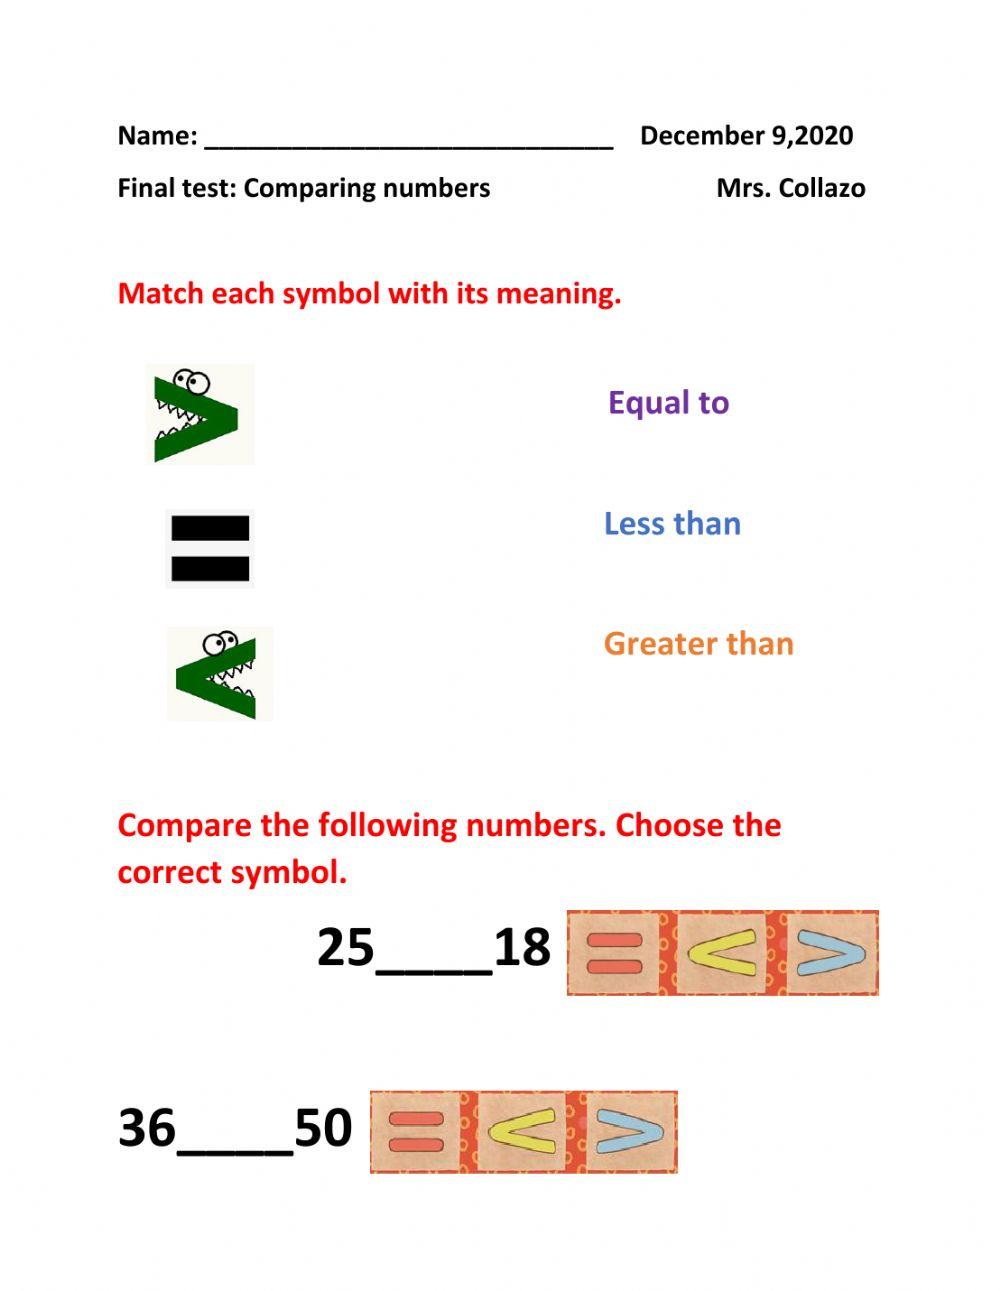 Comparing numbers